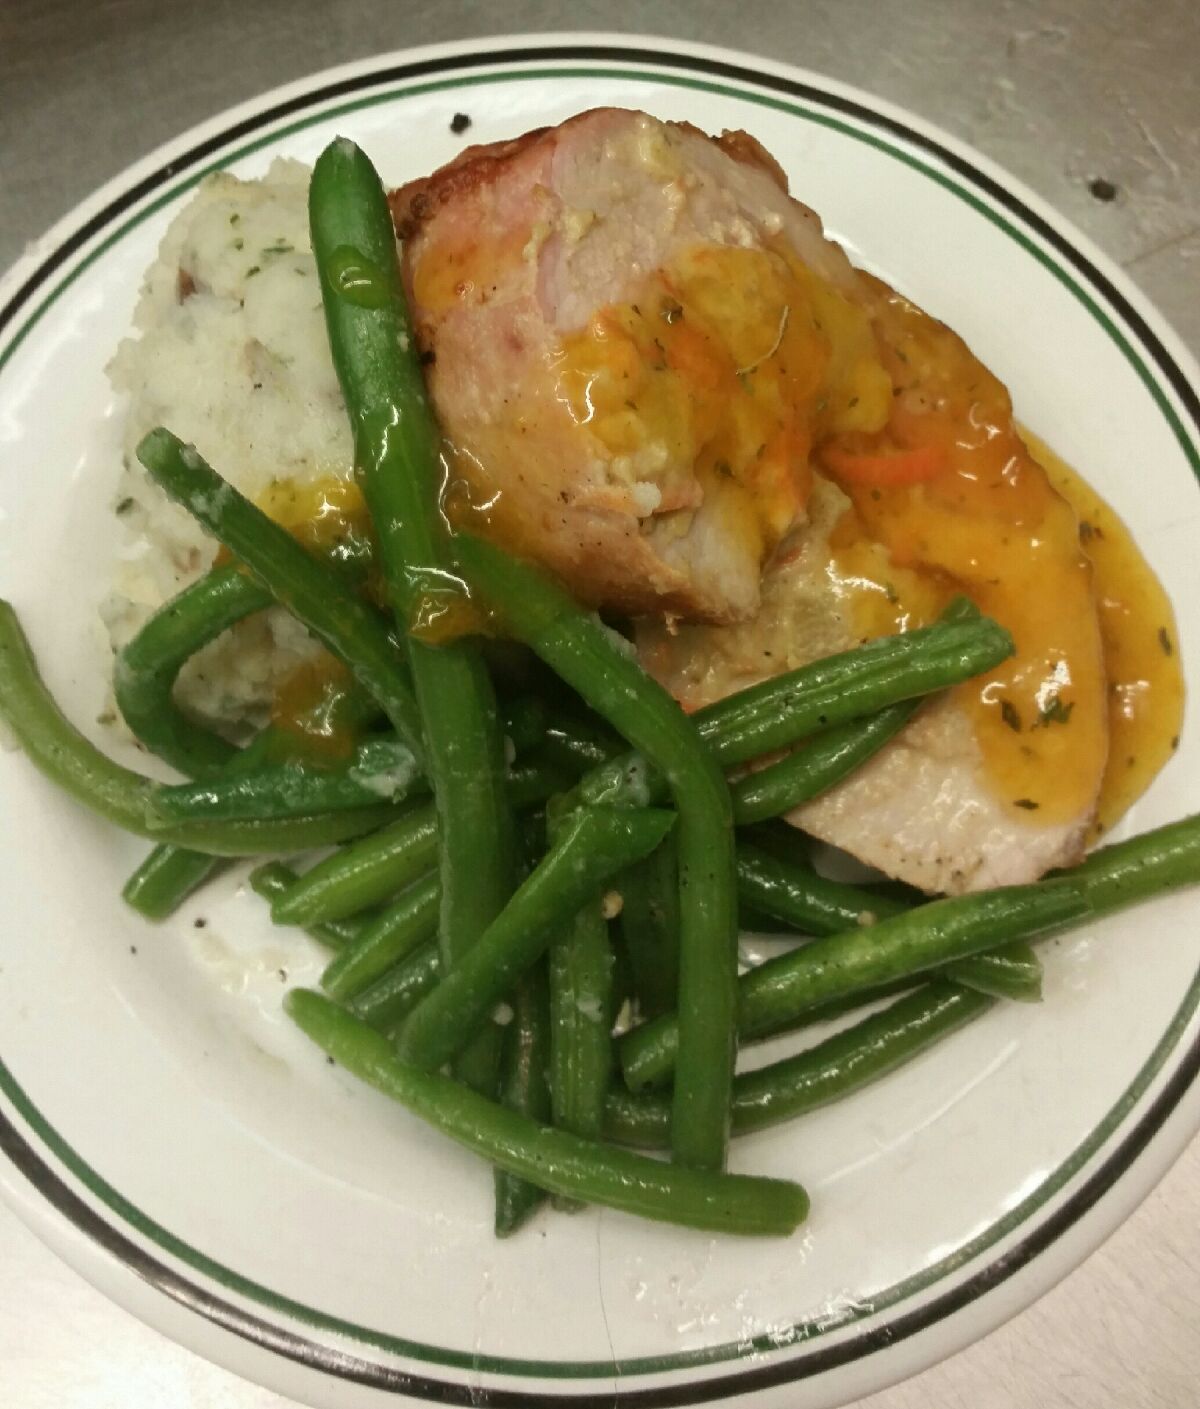 Stuffed Pork Loin with Mashed Potatoes and Green Beans